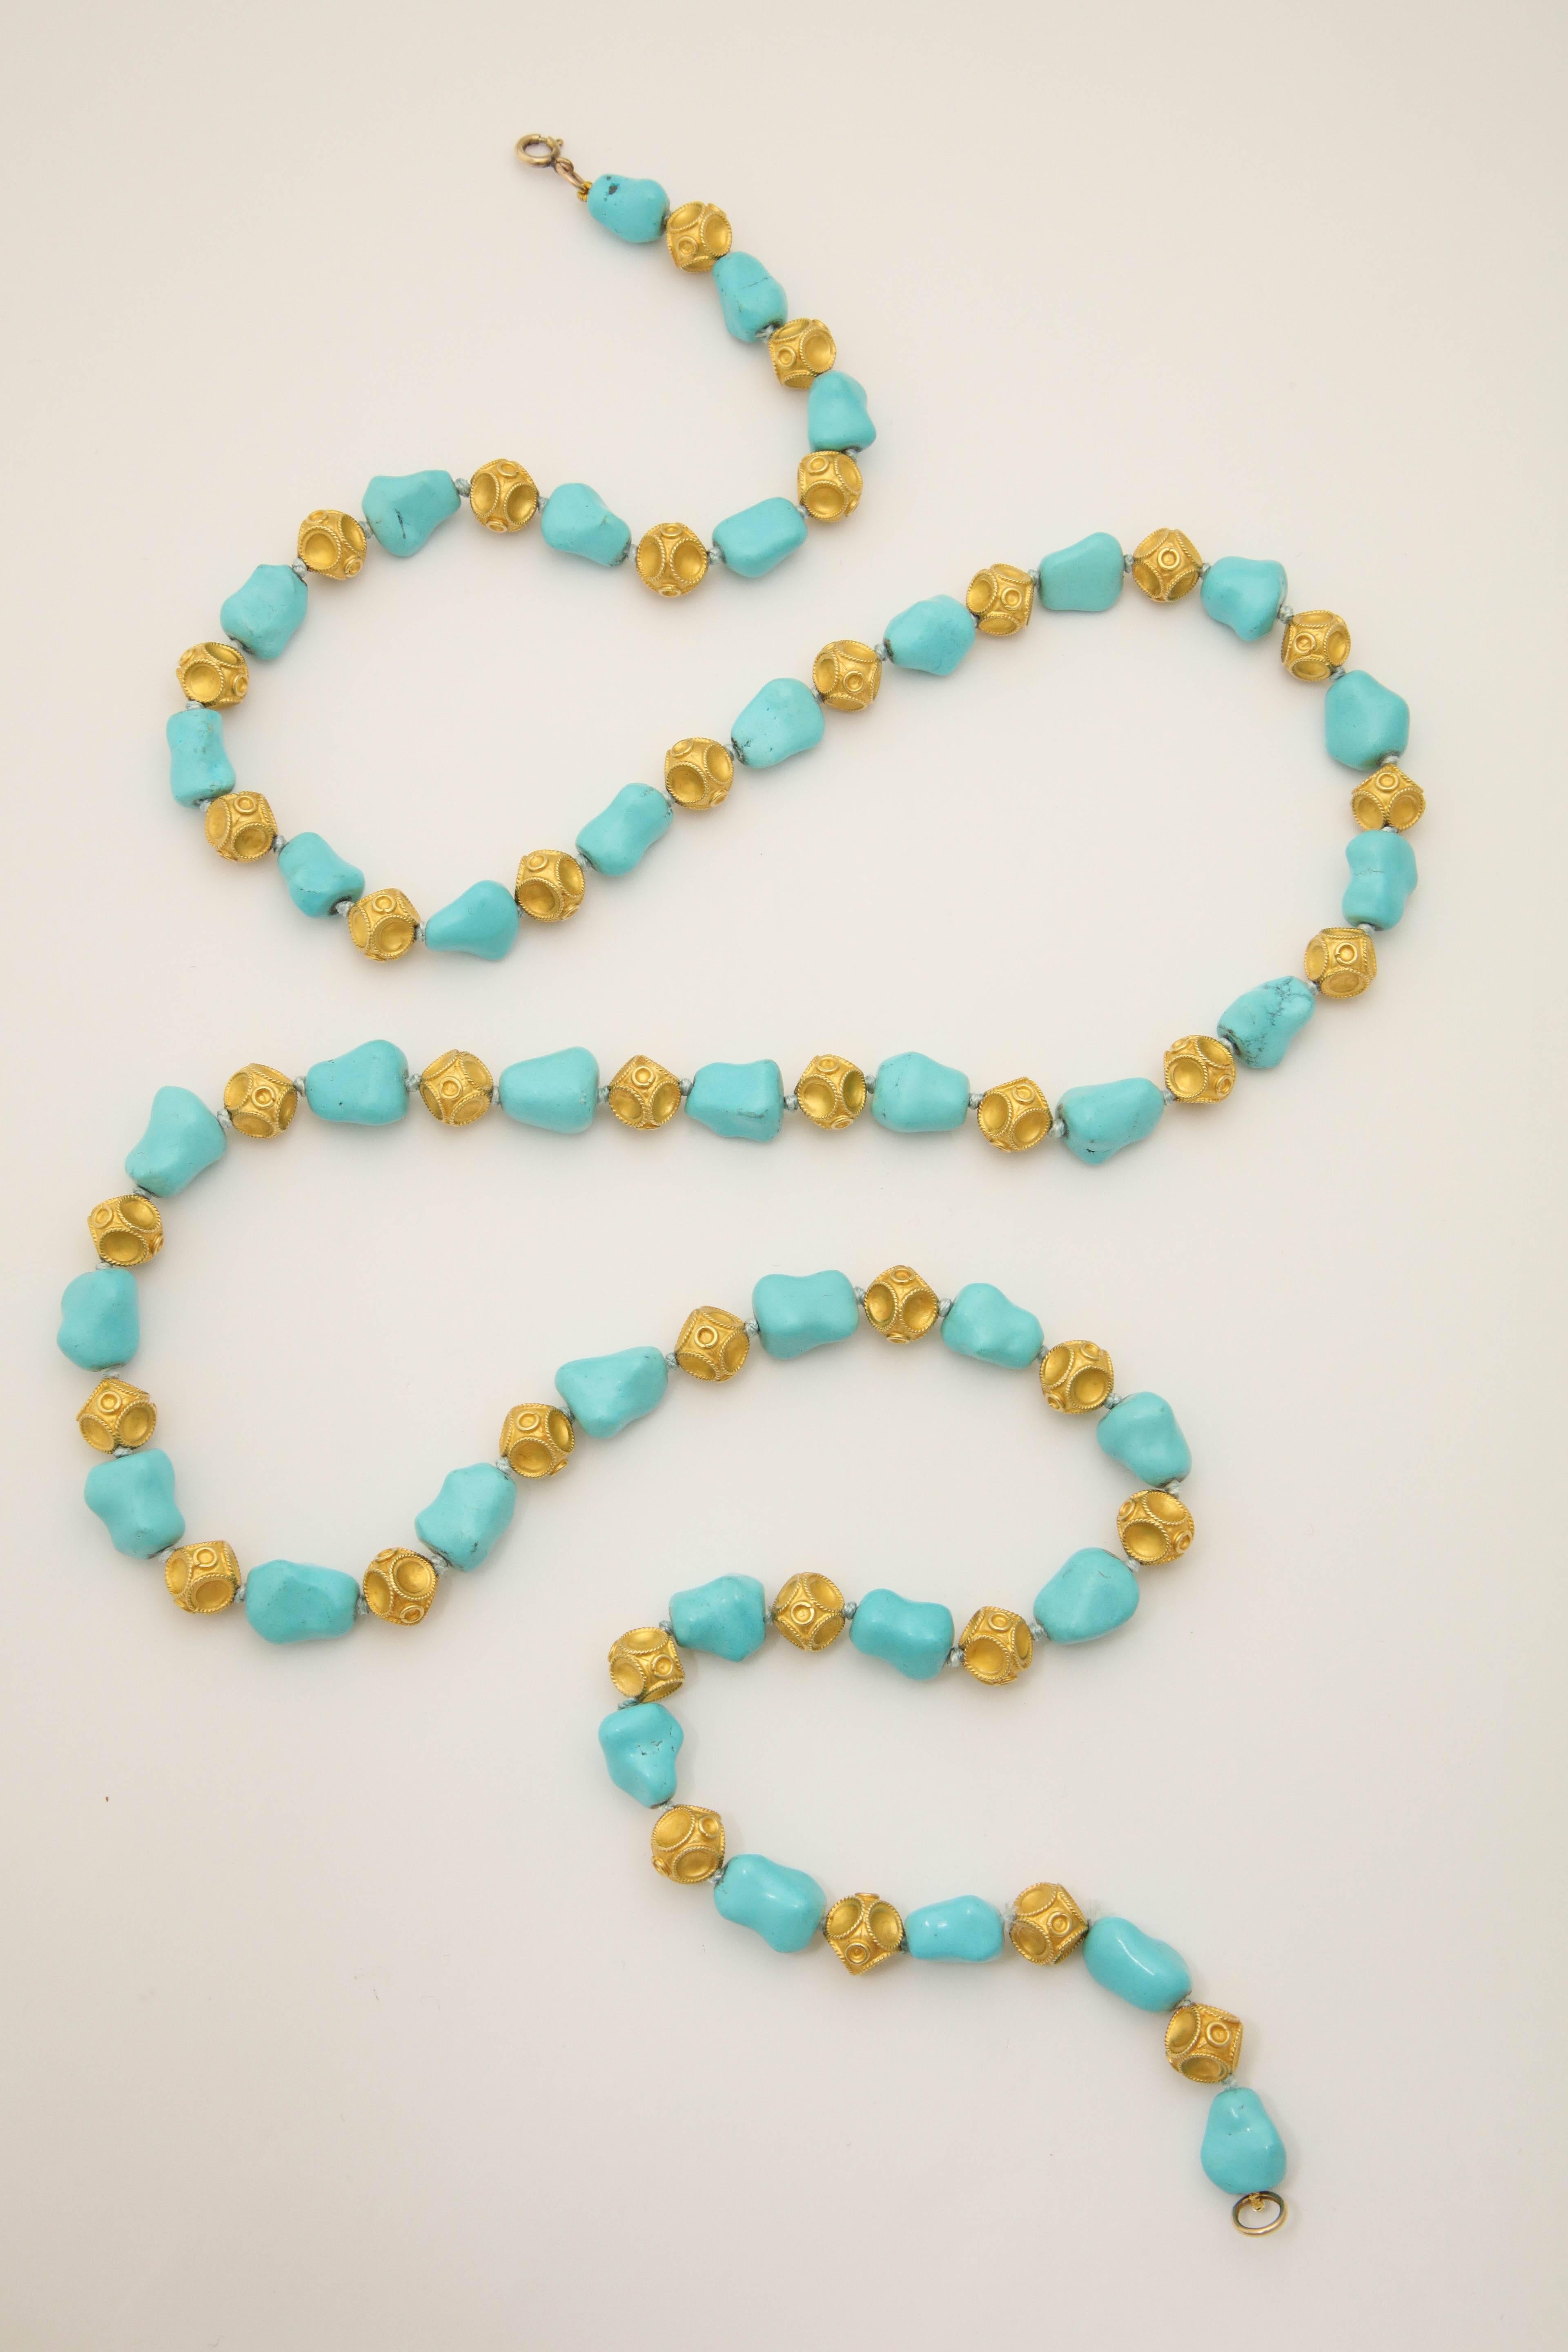 Women's 1960s Nugget Shape Turquoises with Alternating Crater Design Gold Ball Chain